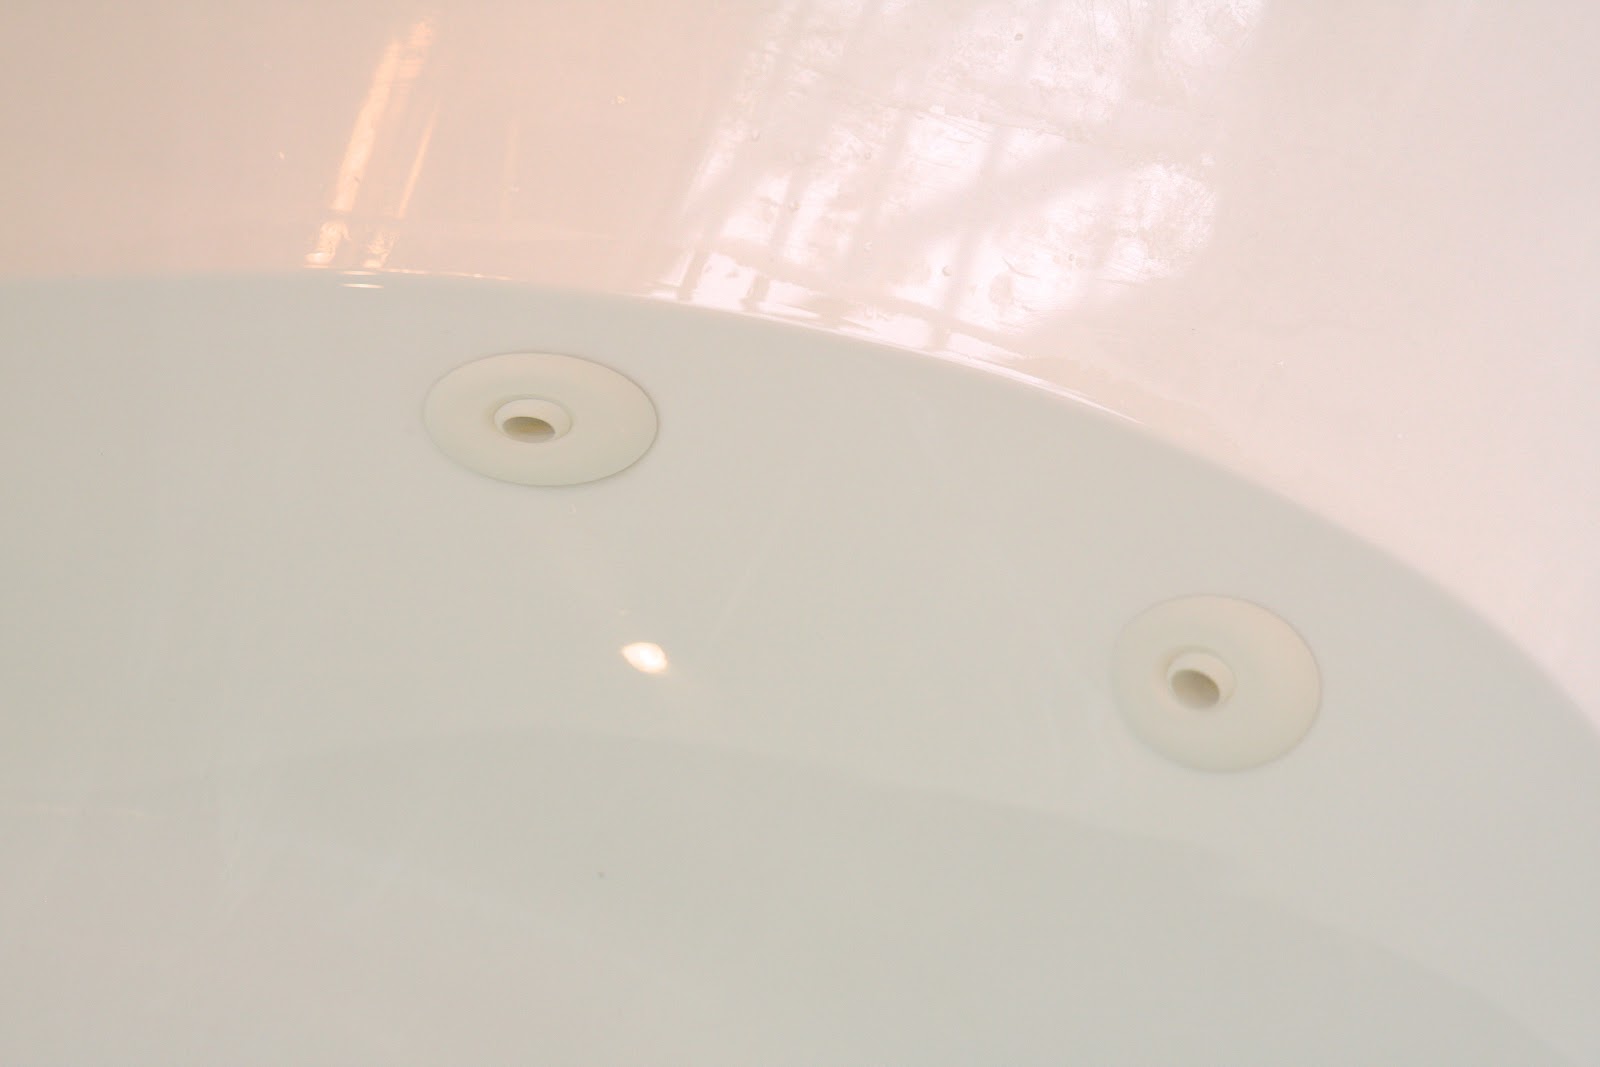 How To Clean Whirlpool Tub Jets - simply organized - Step two: